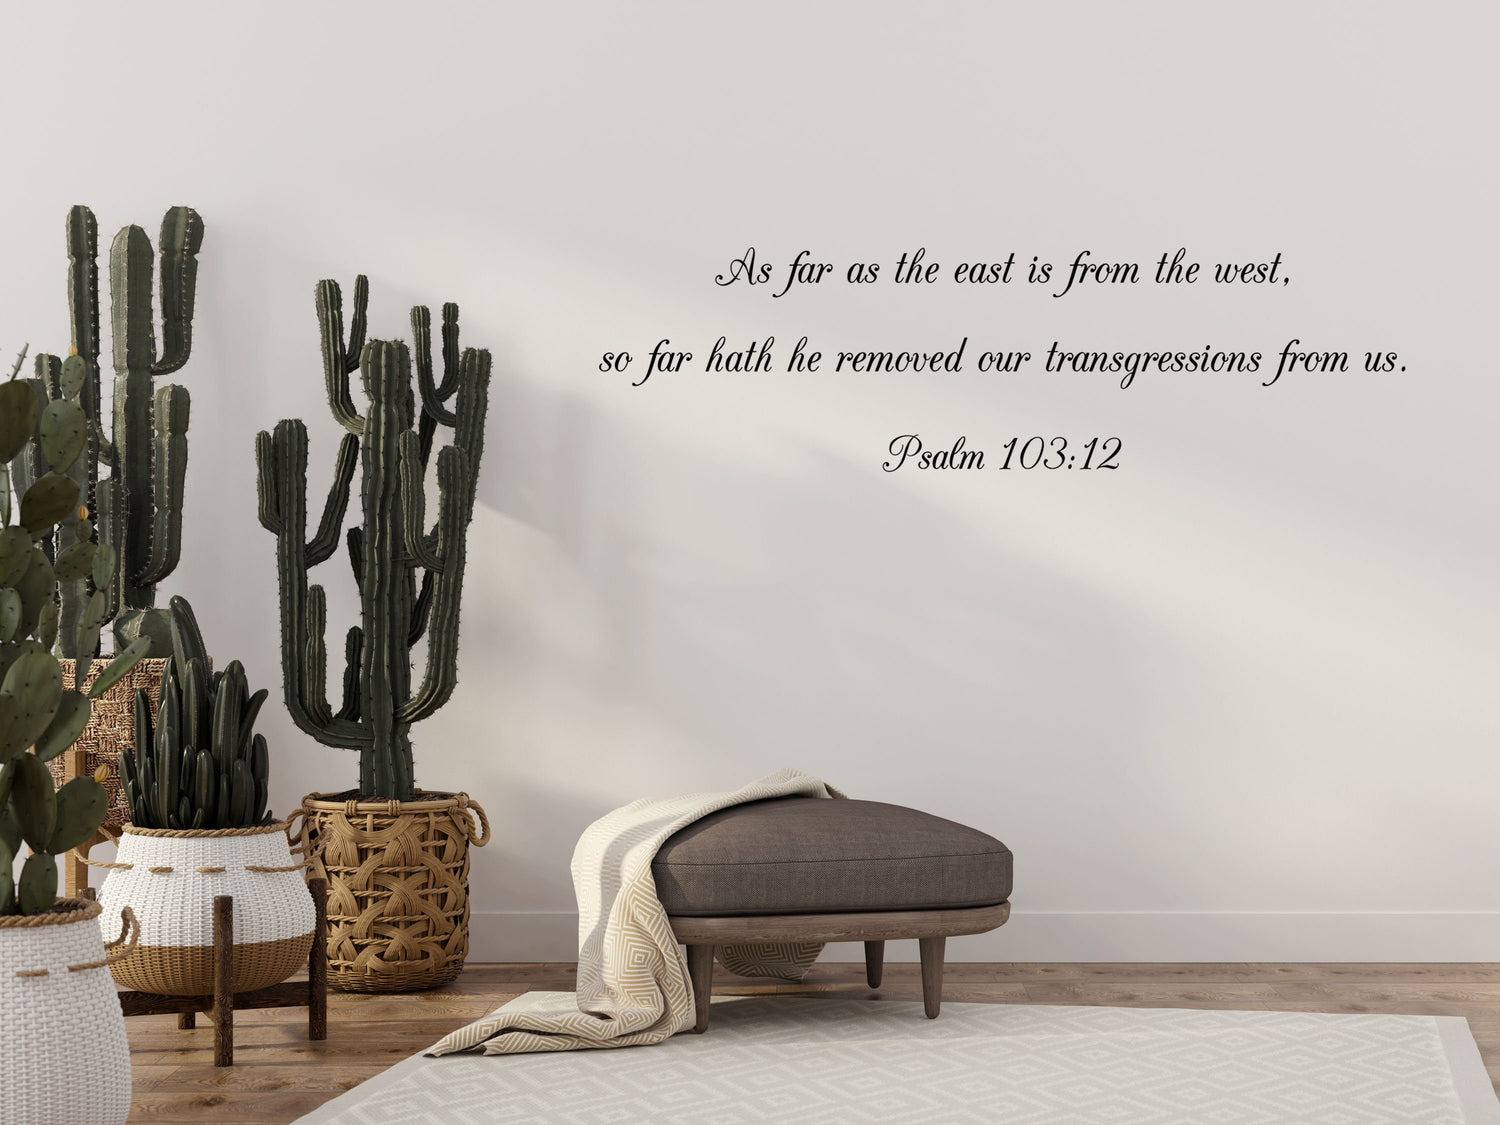 Psalm 103:12 KJV Bible Verse Wall Decal - As Far As The East Is From The West - Christian Quote - Inspirational Bedroom Signs Vinyl Wall Decal Done 